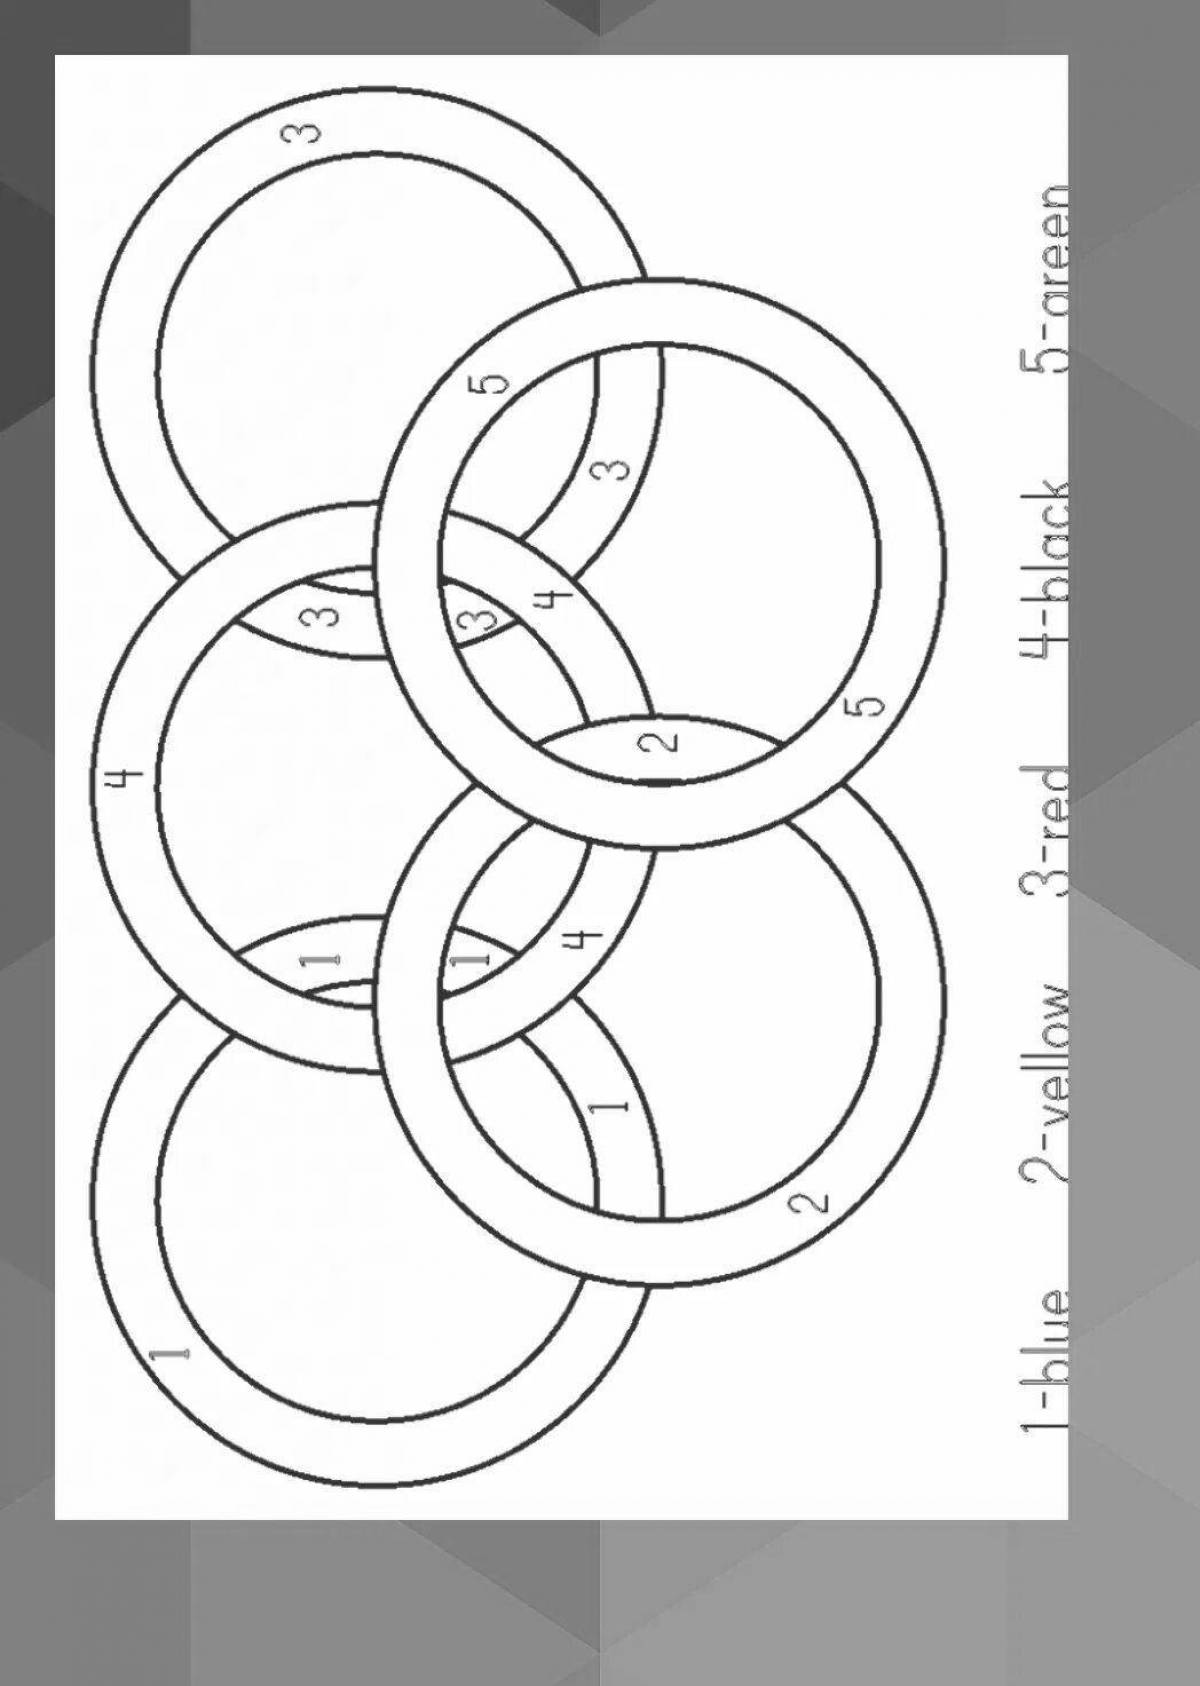 Colorful printable olympic rings coloring page